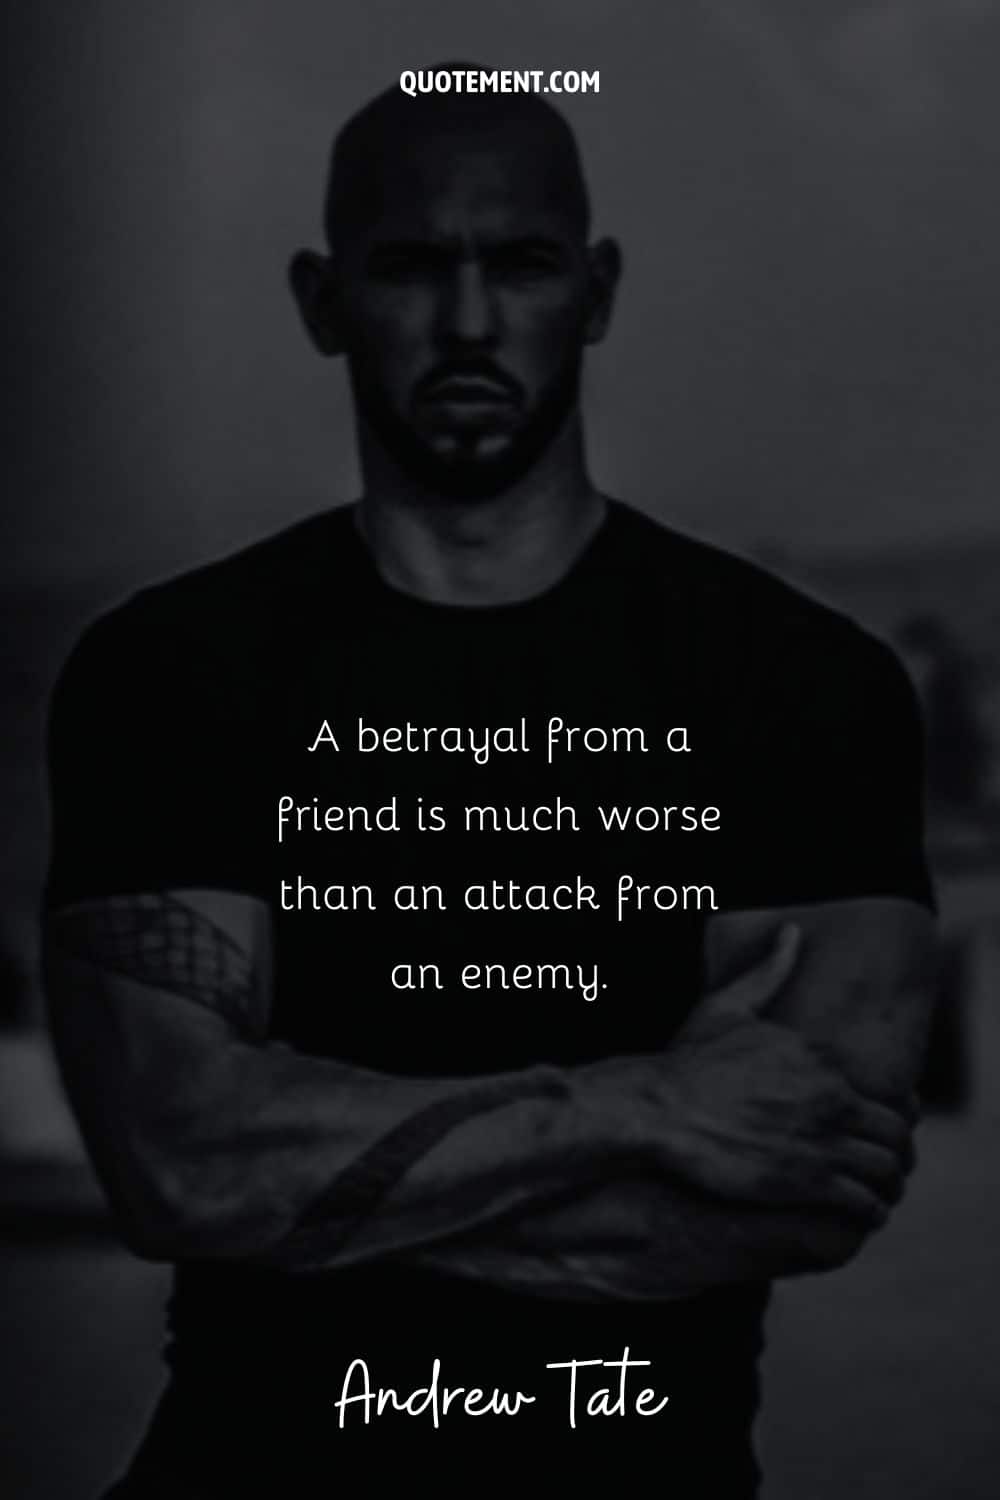 a bulky man representing andrew tate wallpaper quote